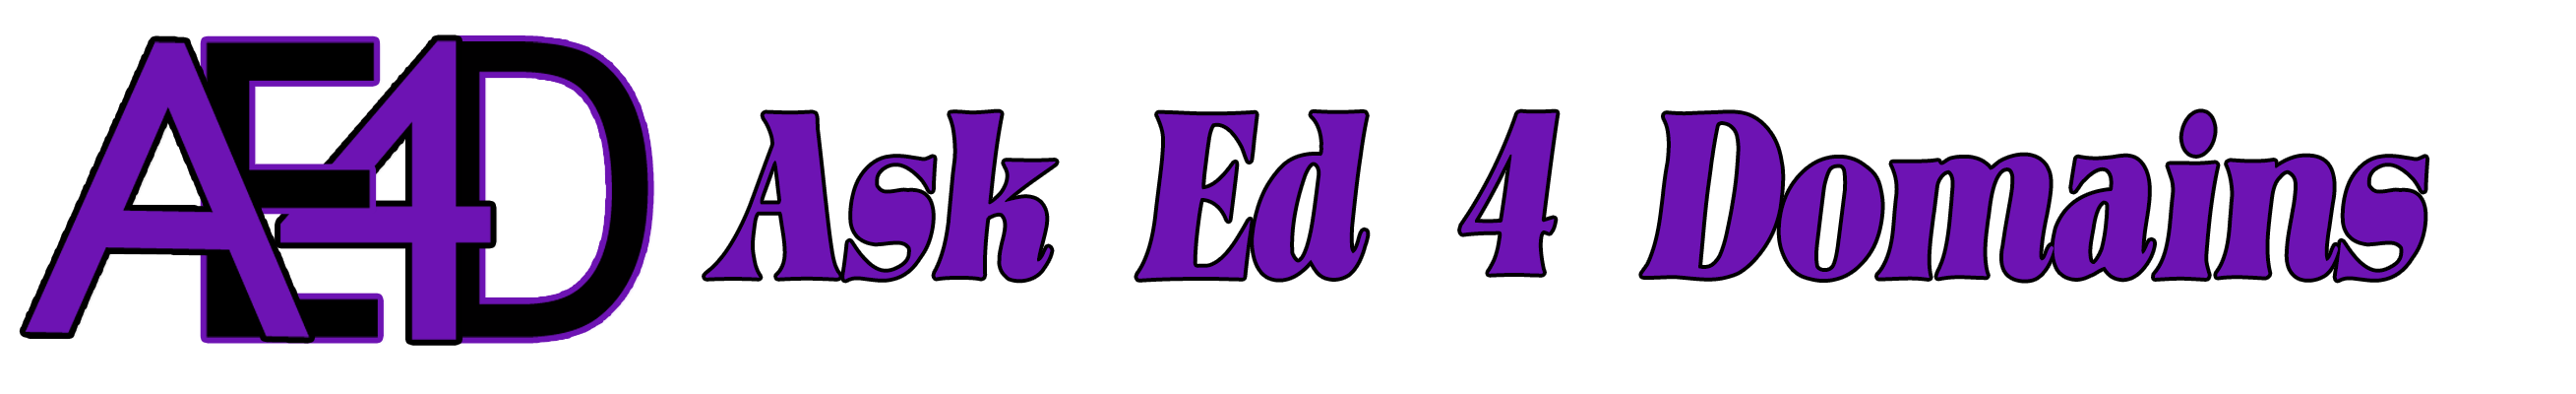 Ask Ed 4 Domains